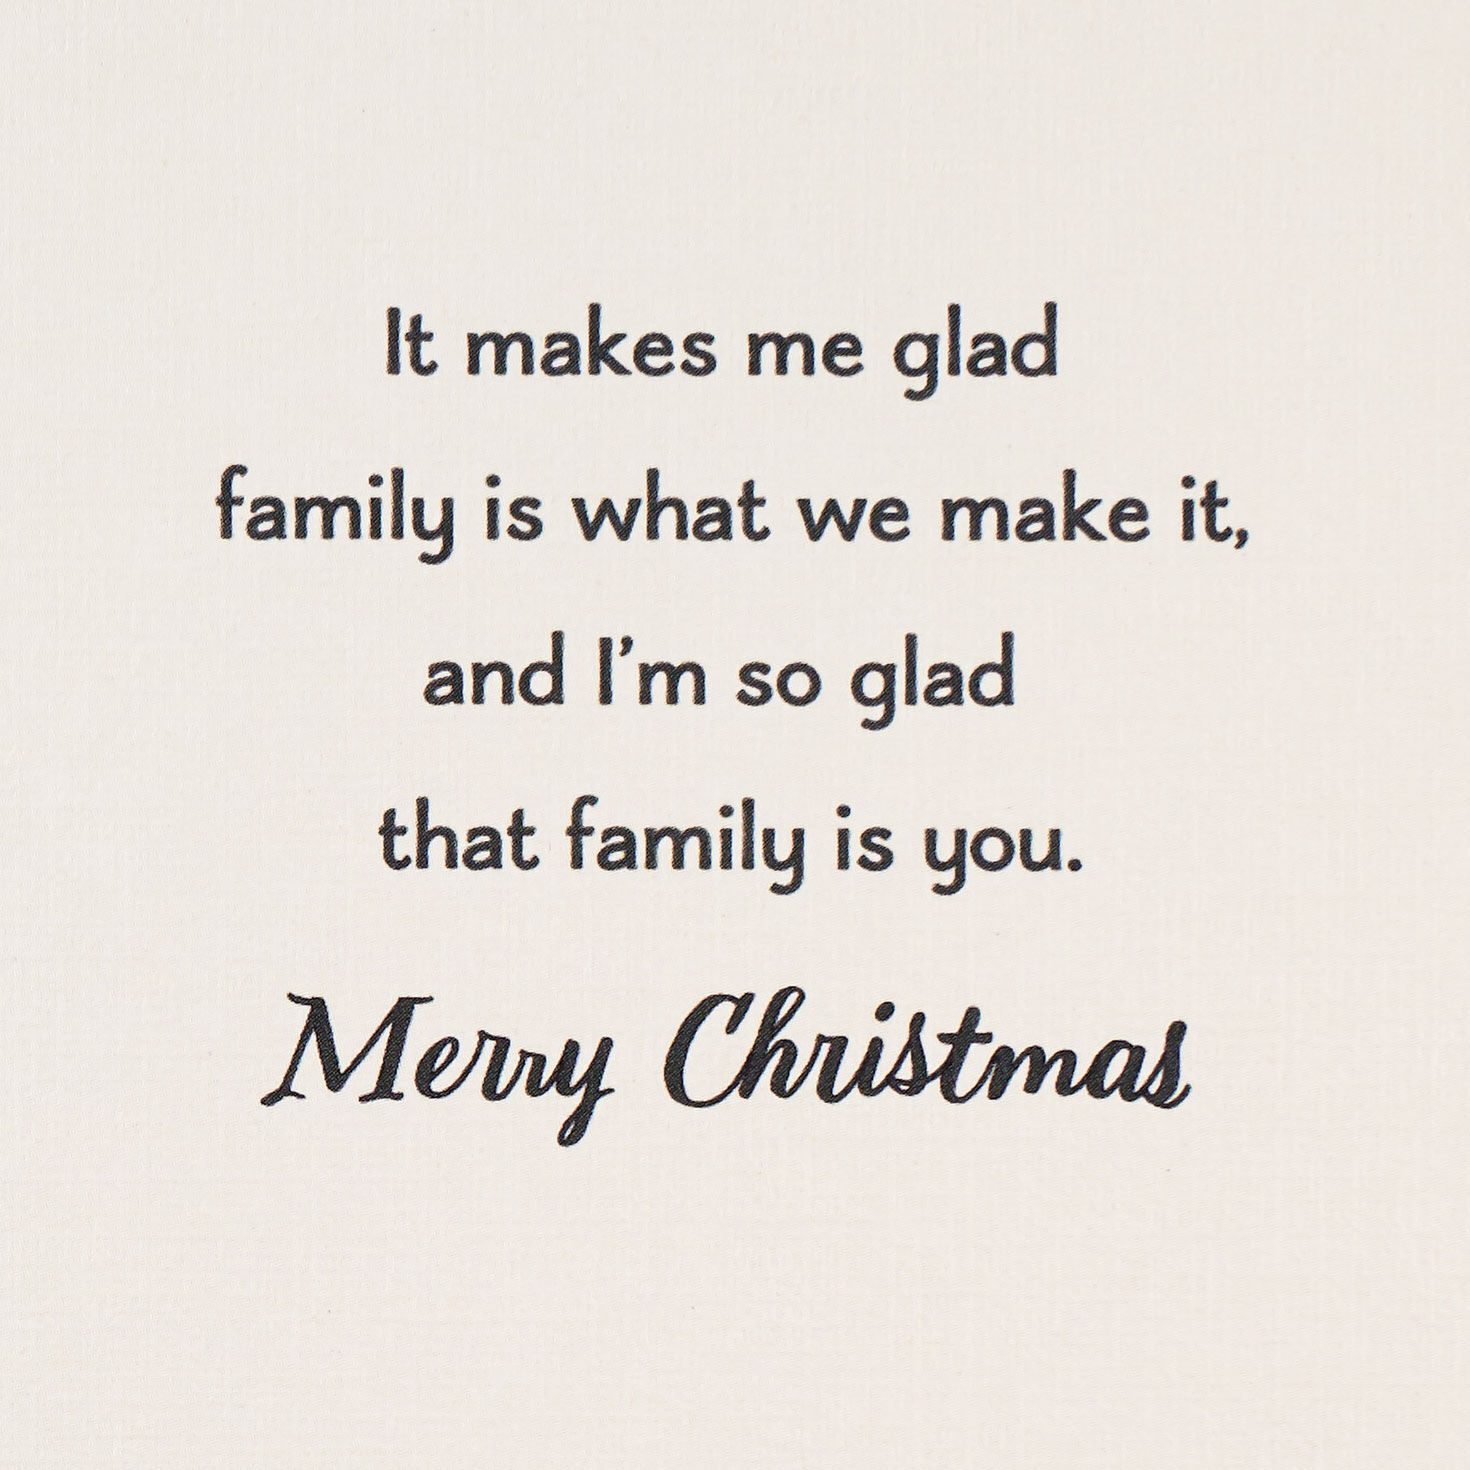 Family Matters Christmas Card - Greeting Cards | Hallmark